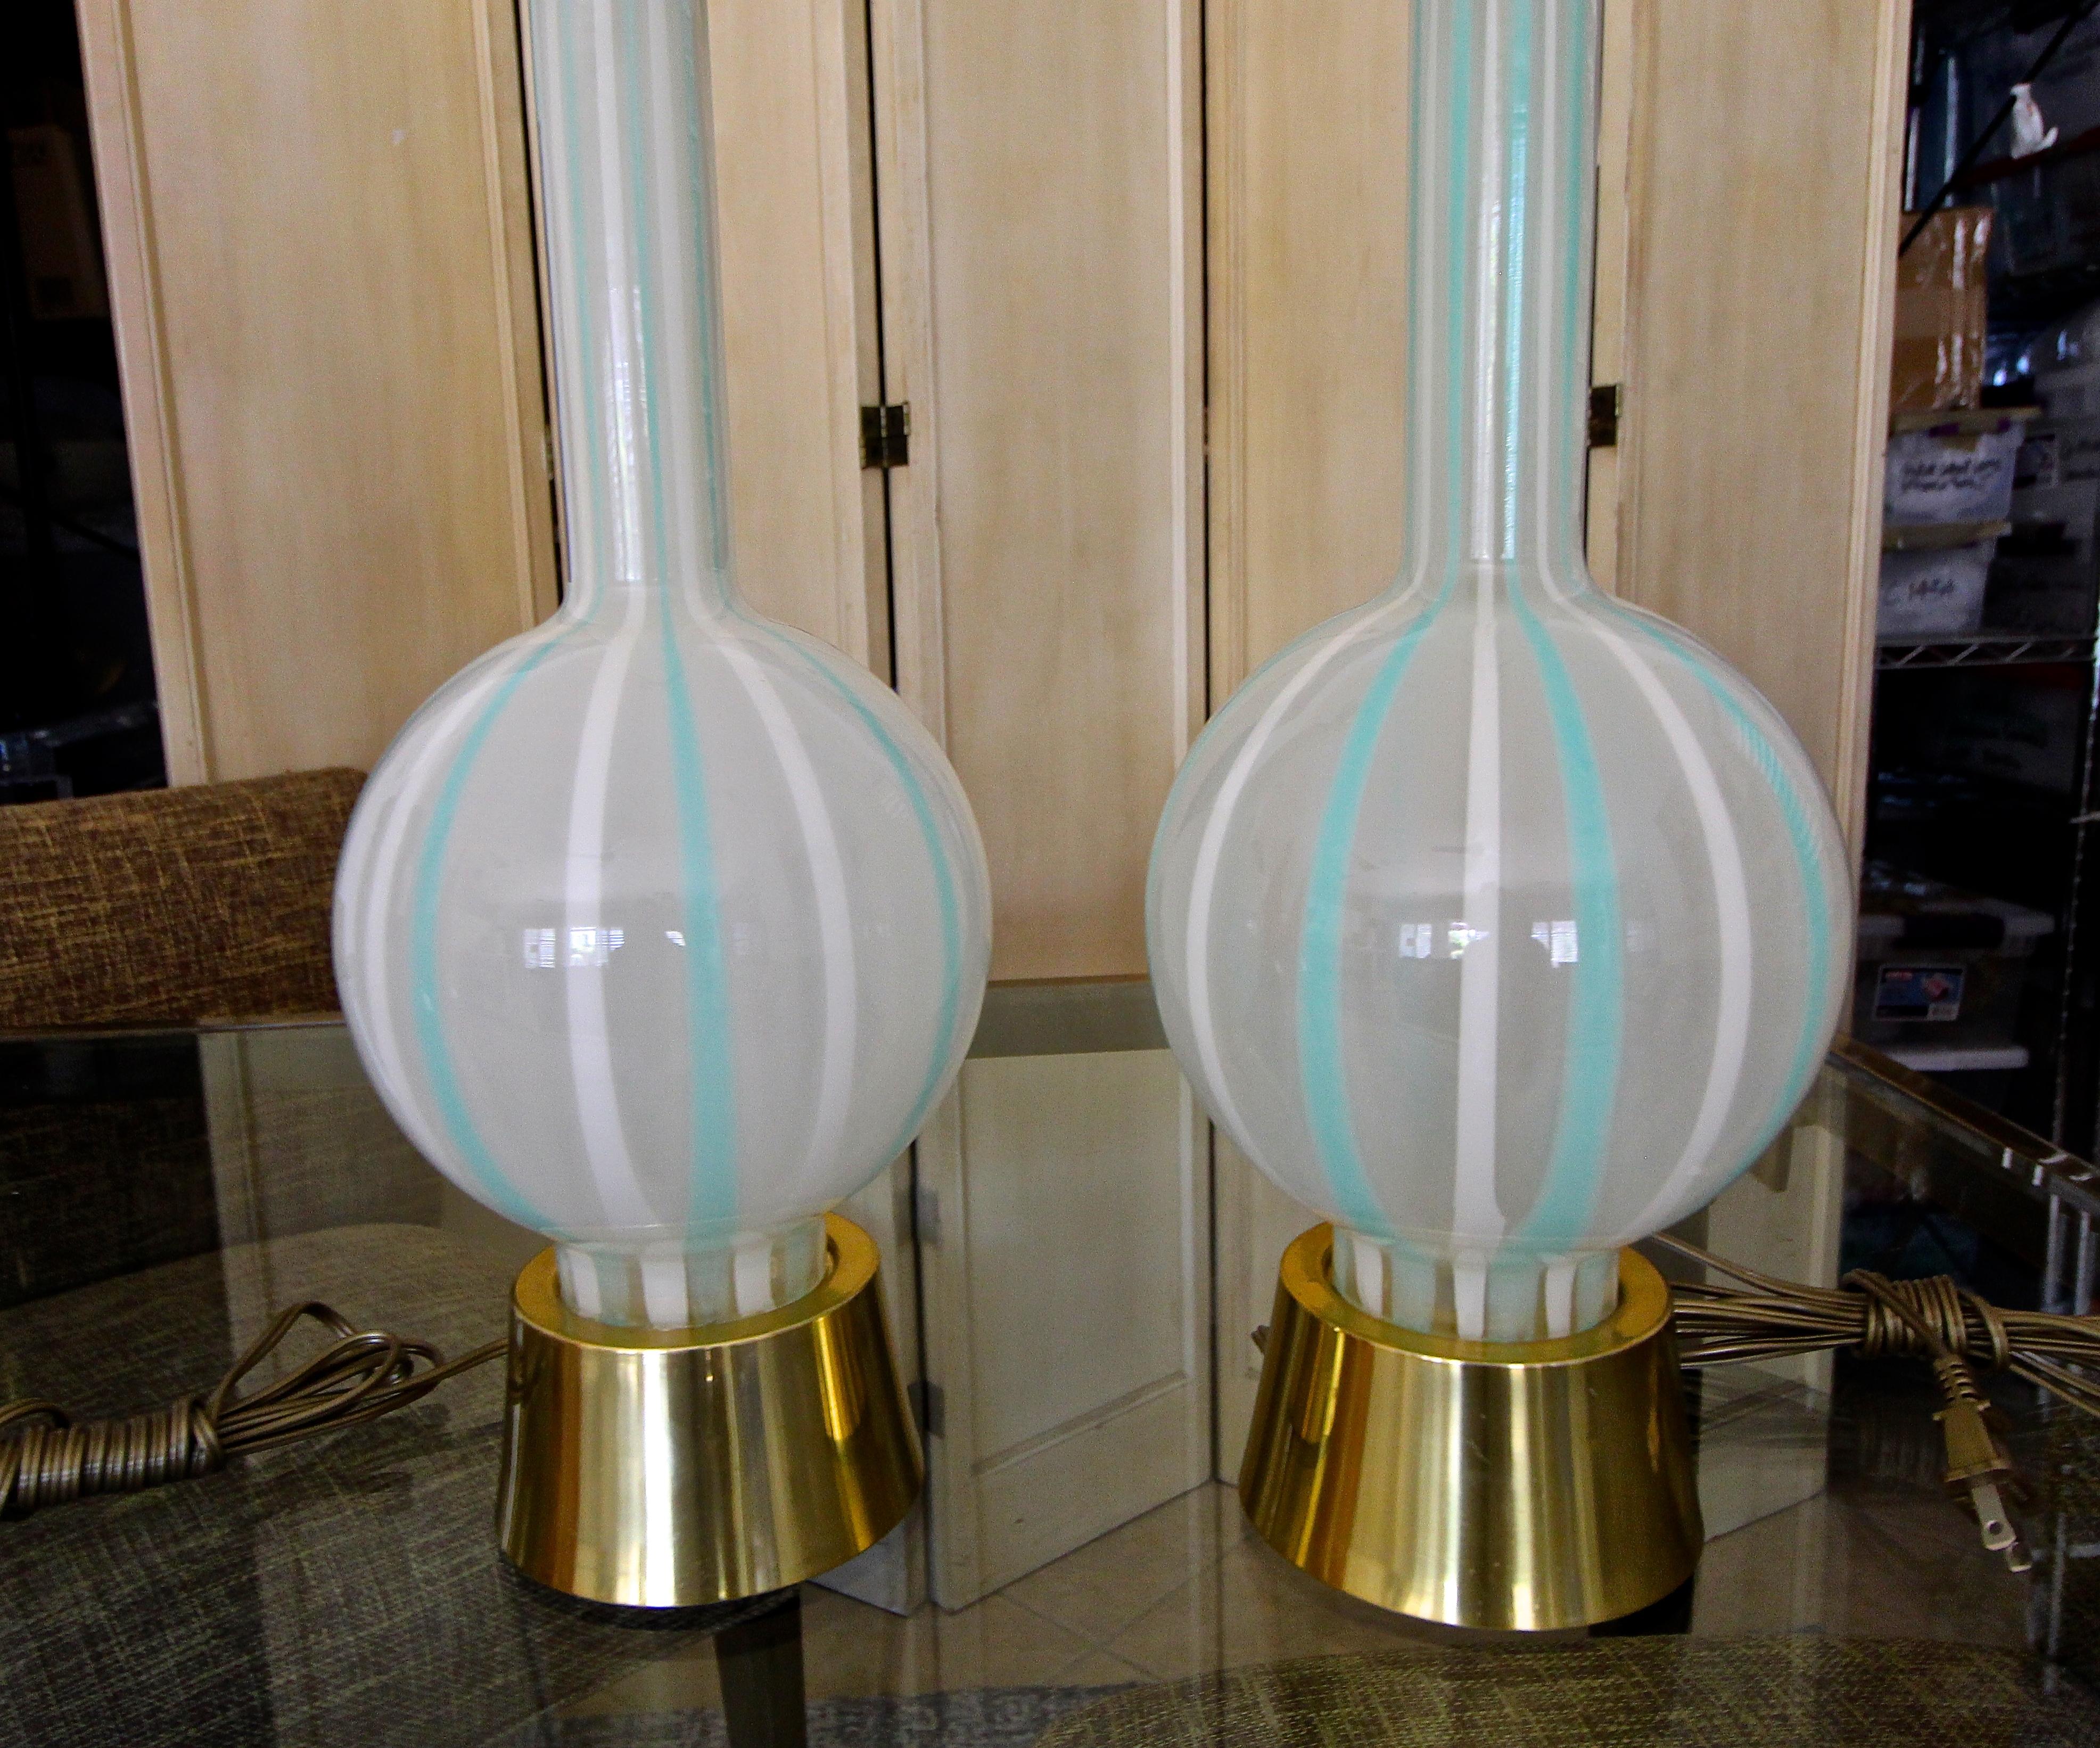 Pair of Teal and White Striped Glass Table Lamps 1